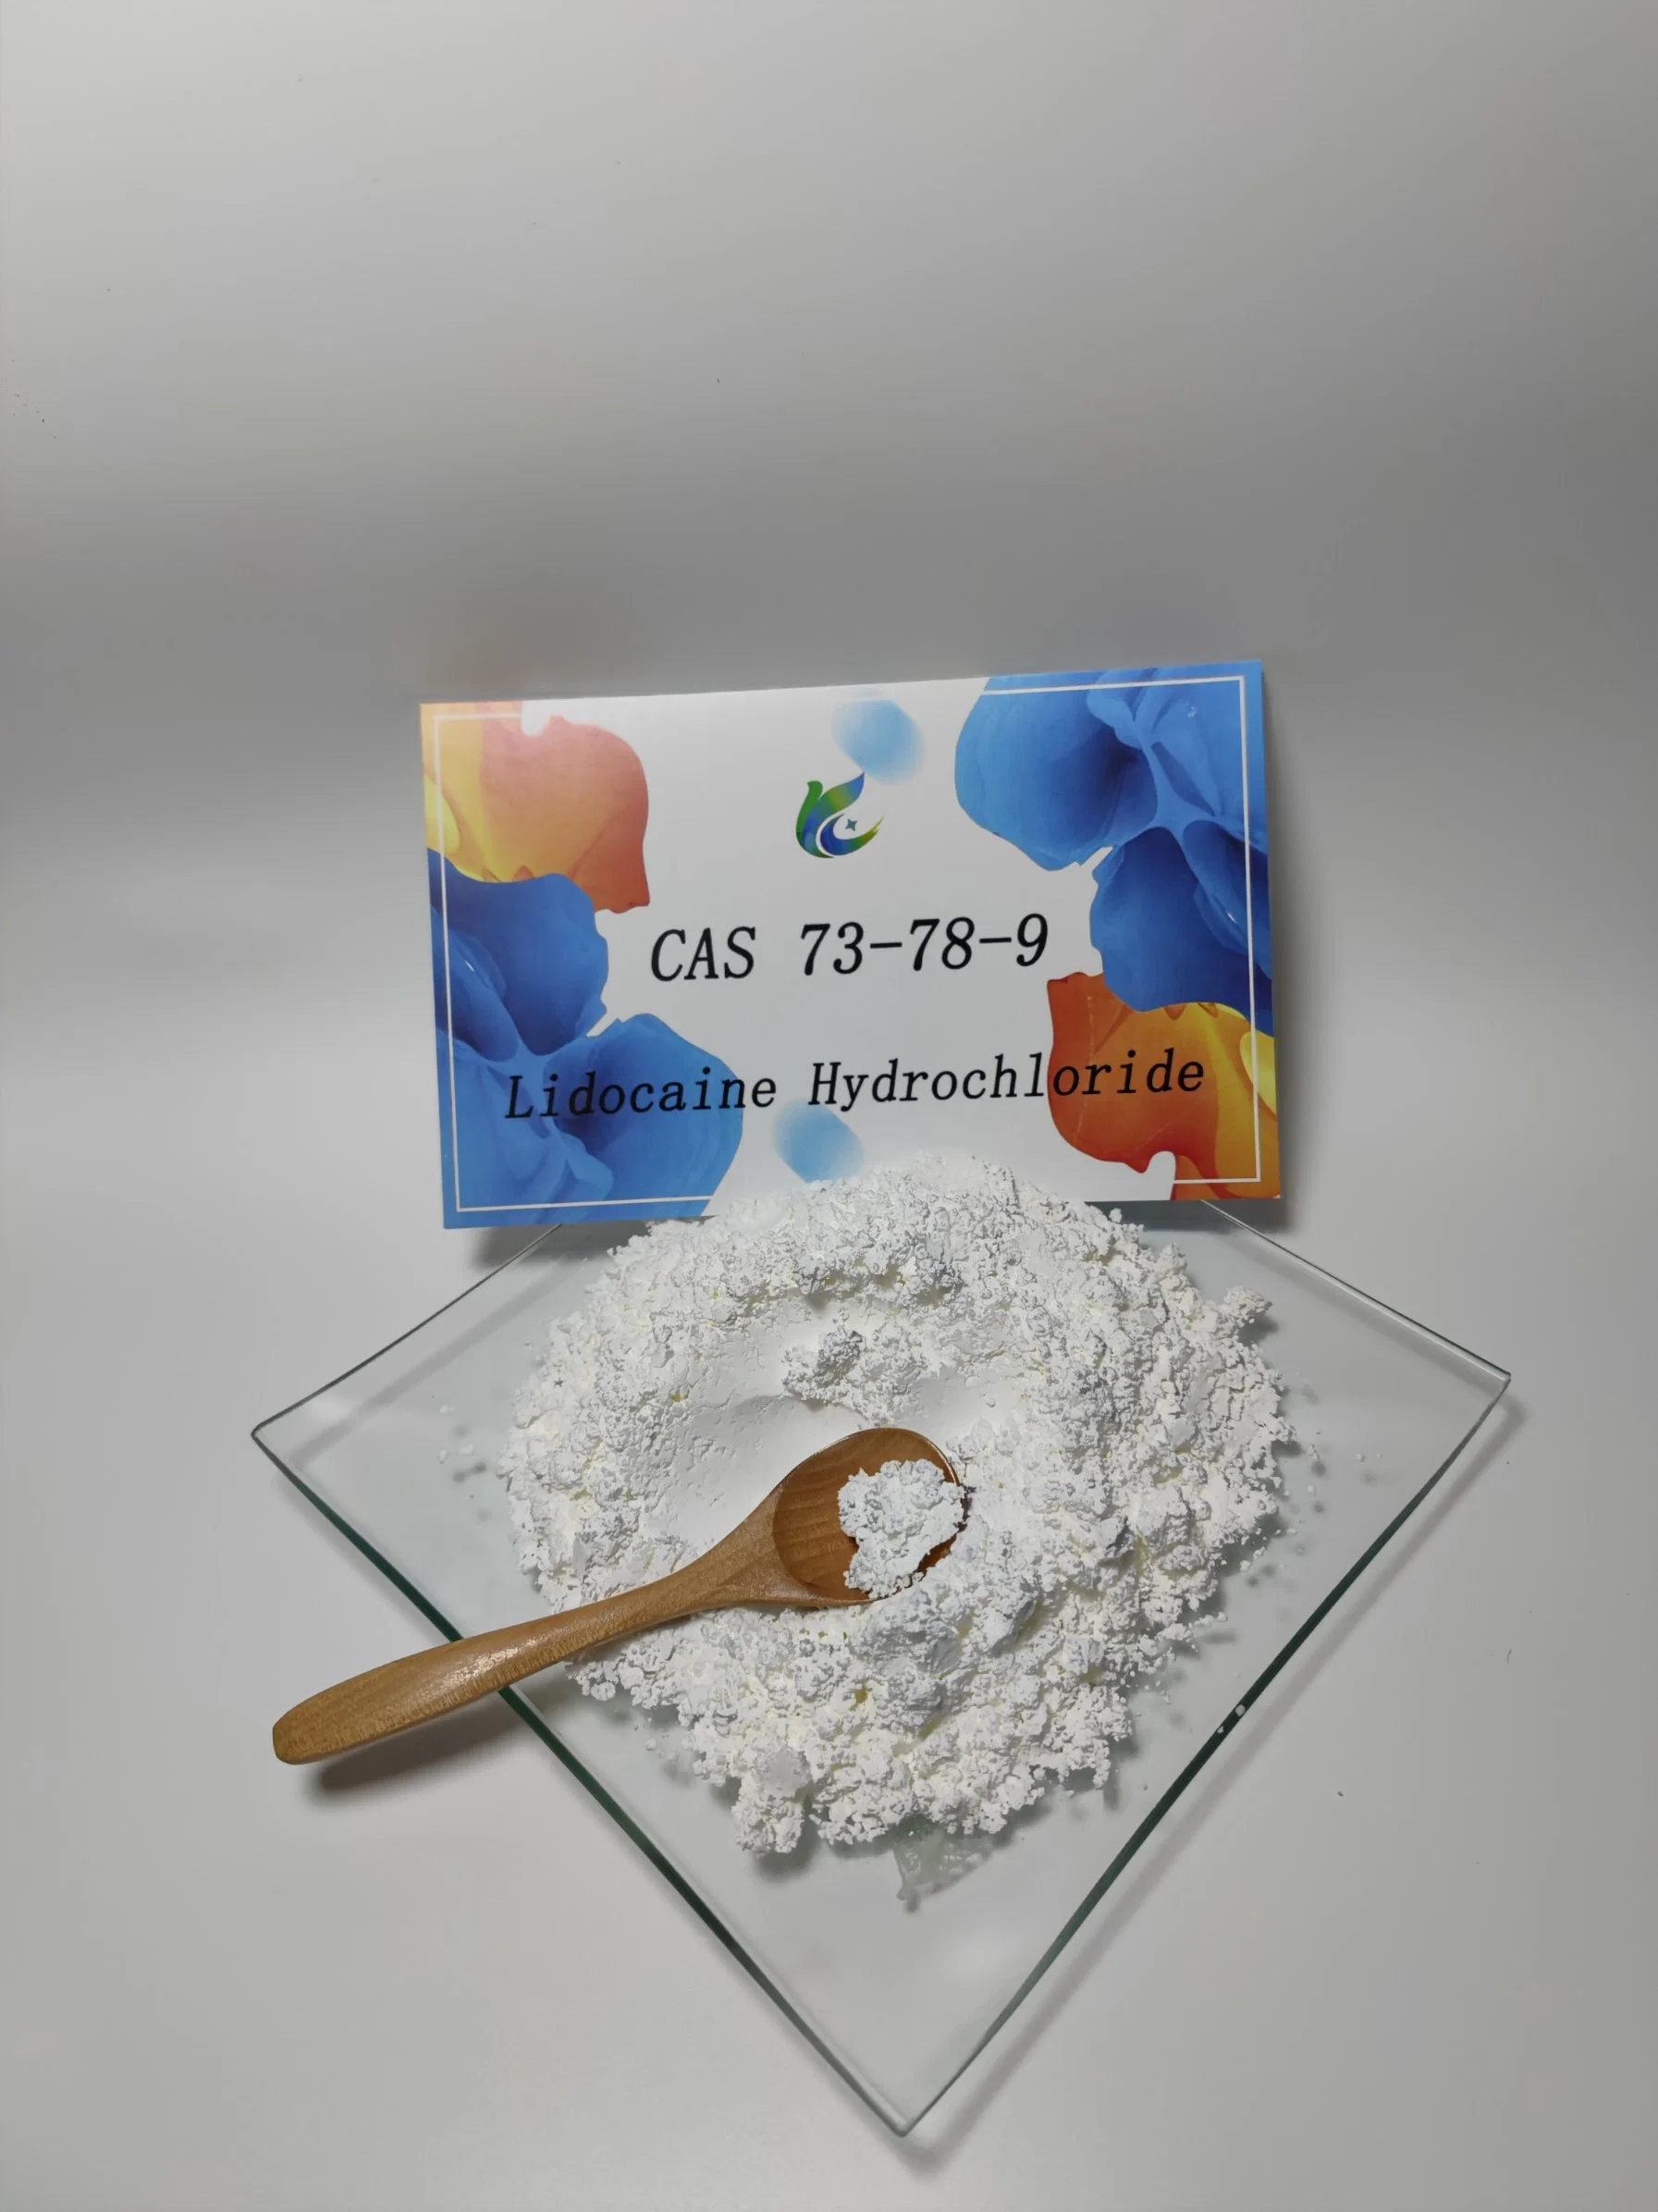 Local Anaesthetic 99% Purity Lidocaine Hydrochloride/Lidocaine HCl Pain Relief Powder CAS 73-78-9 Security Clearance